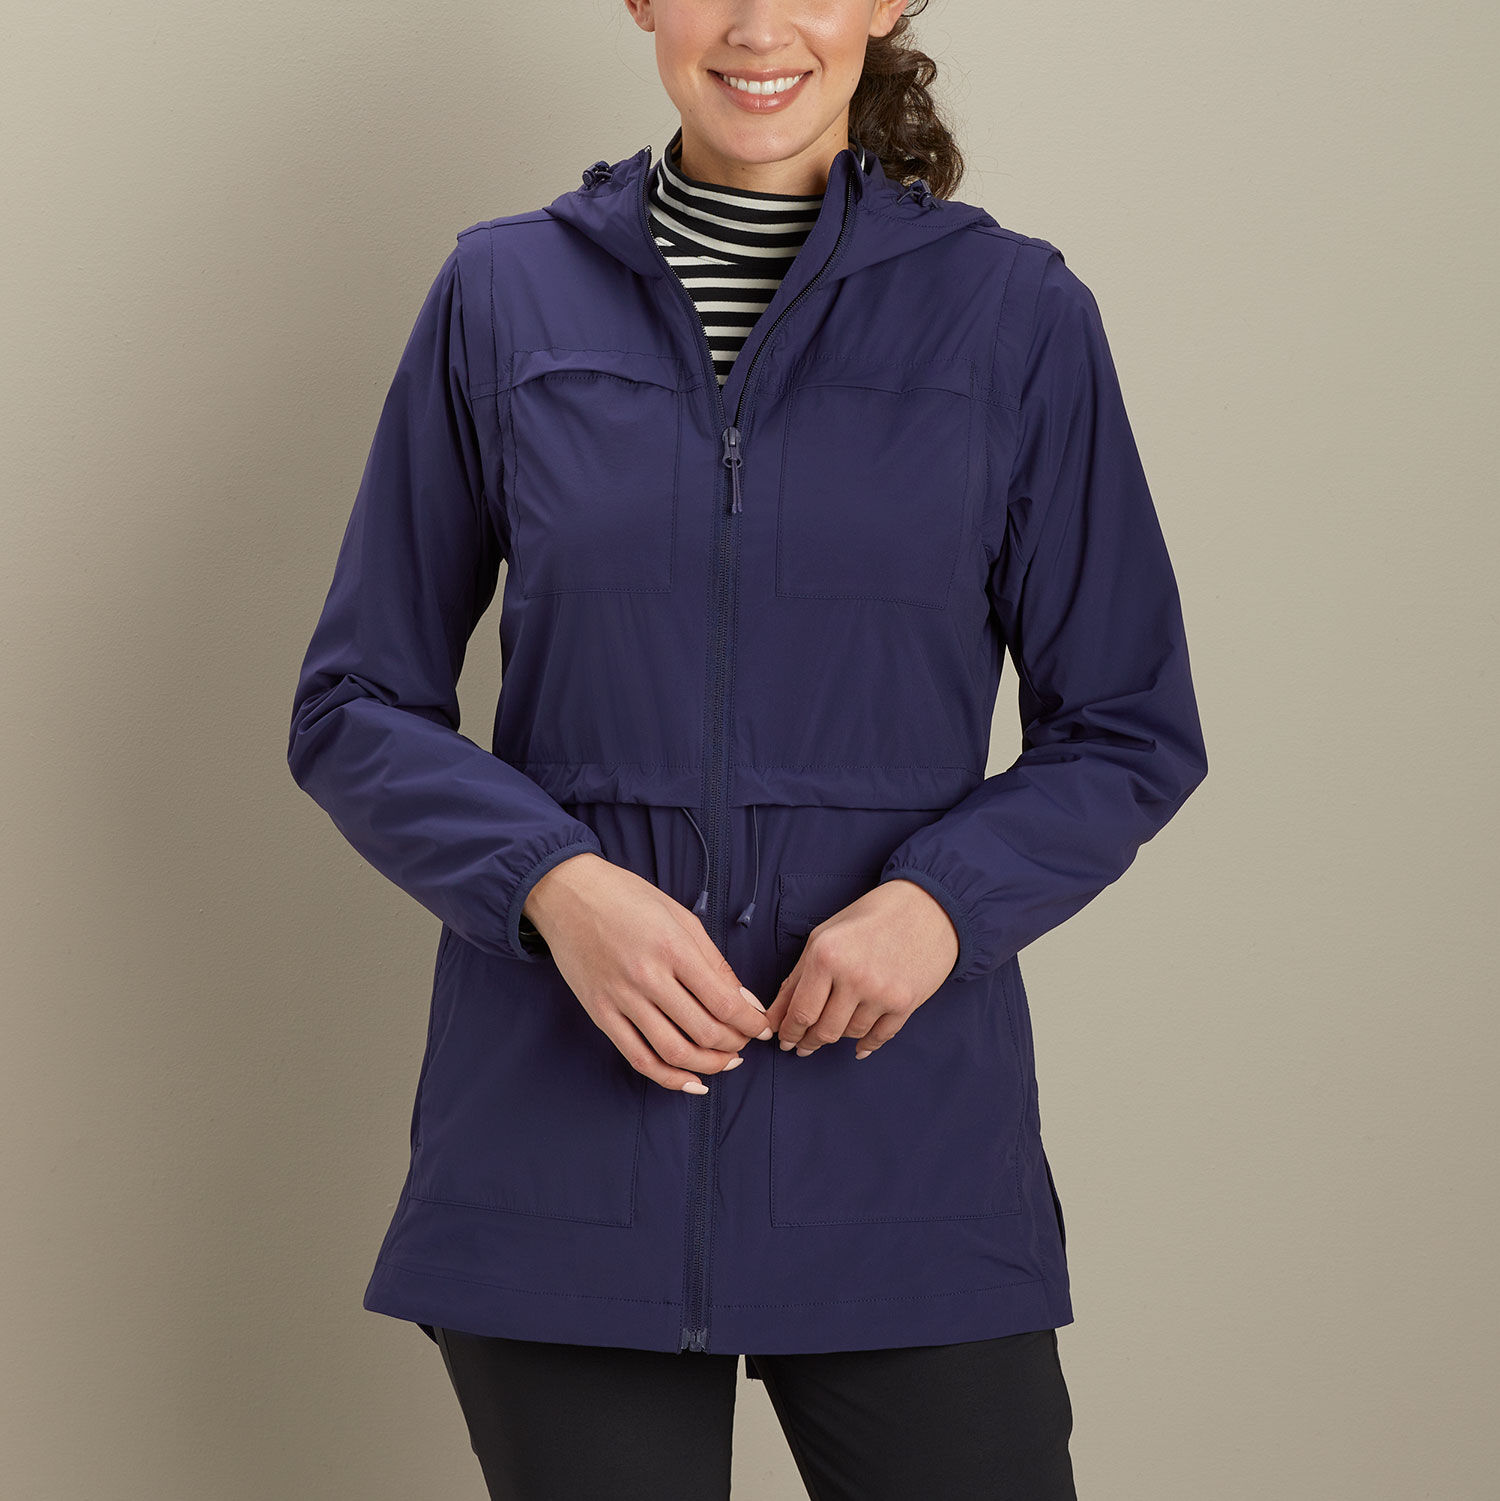 Women's Nonstop Convertible Utility Jacket | Duluth Trading Company